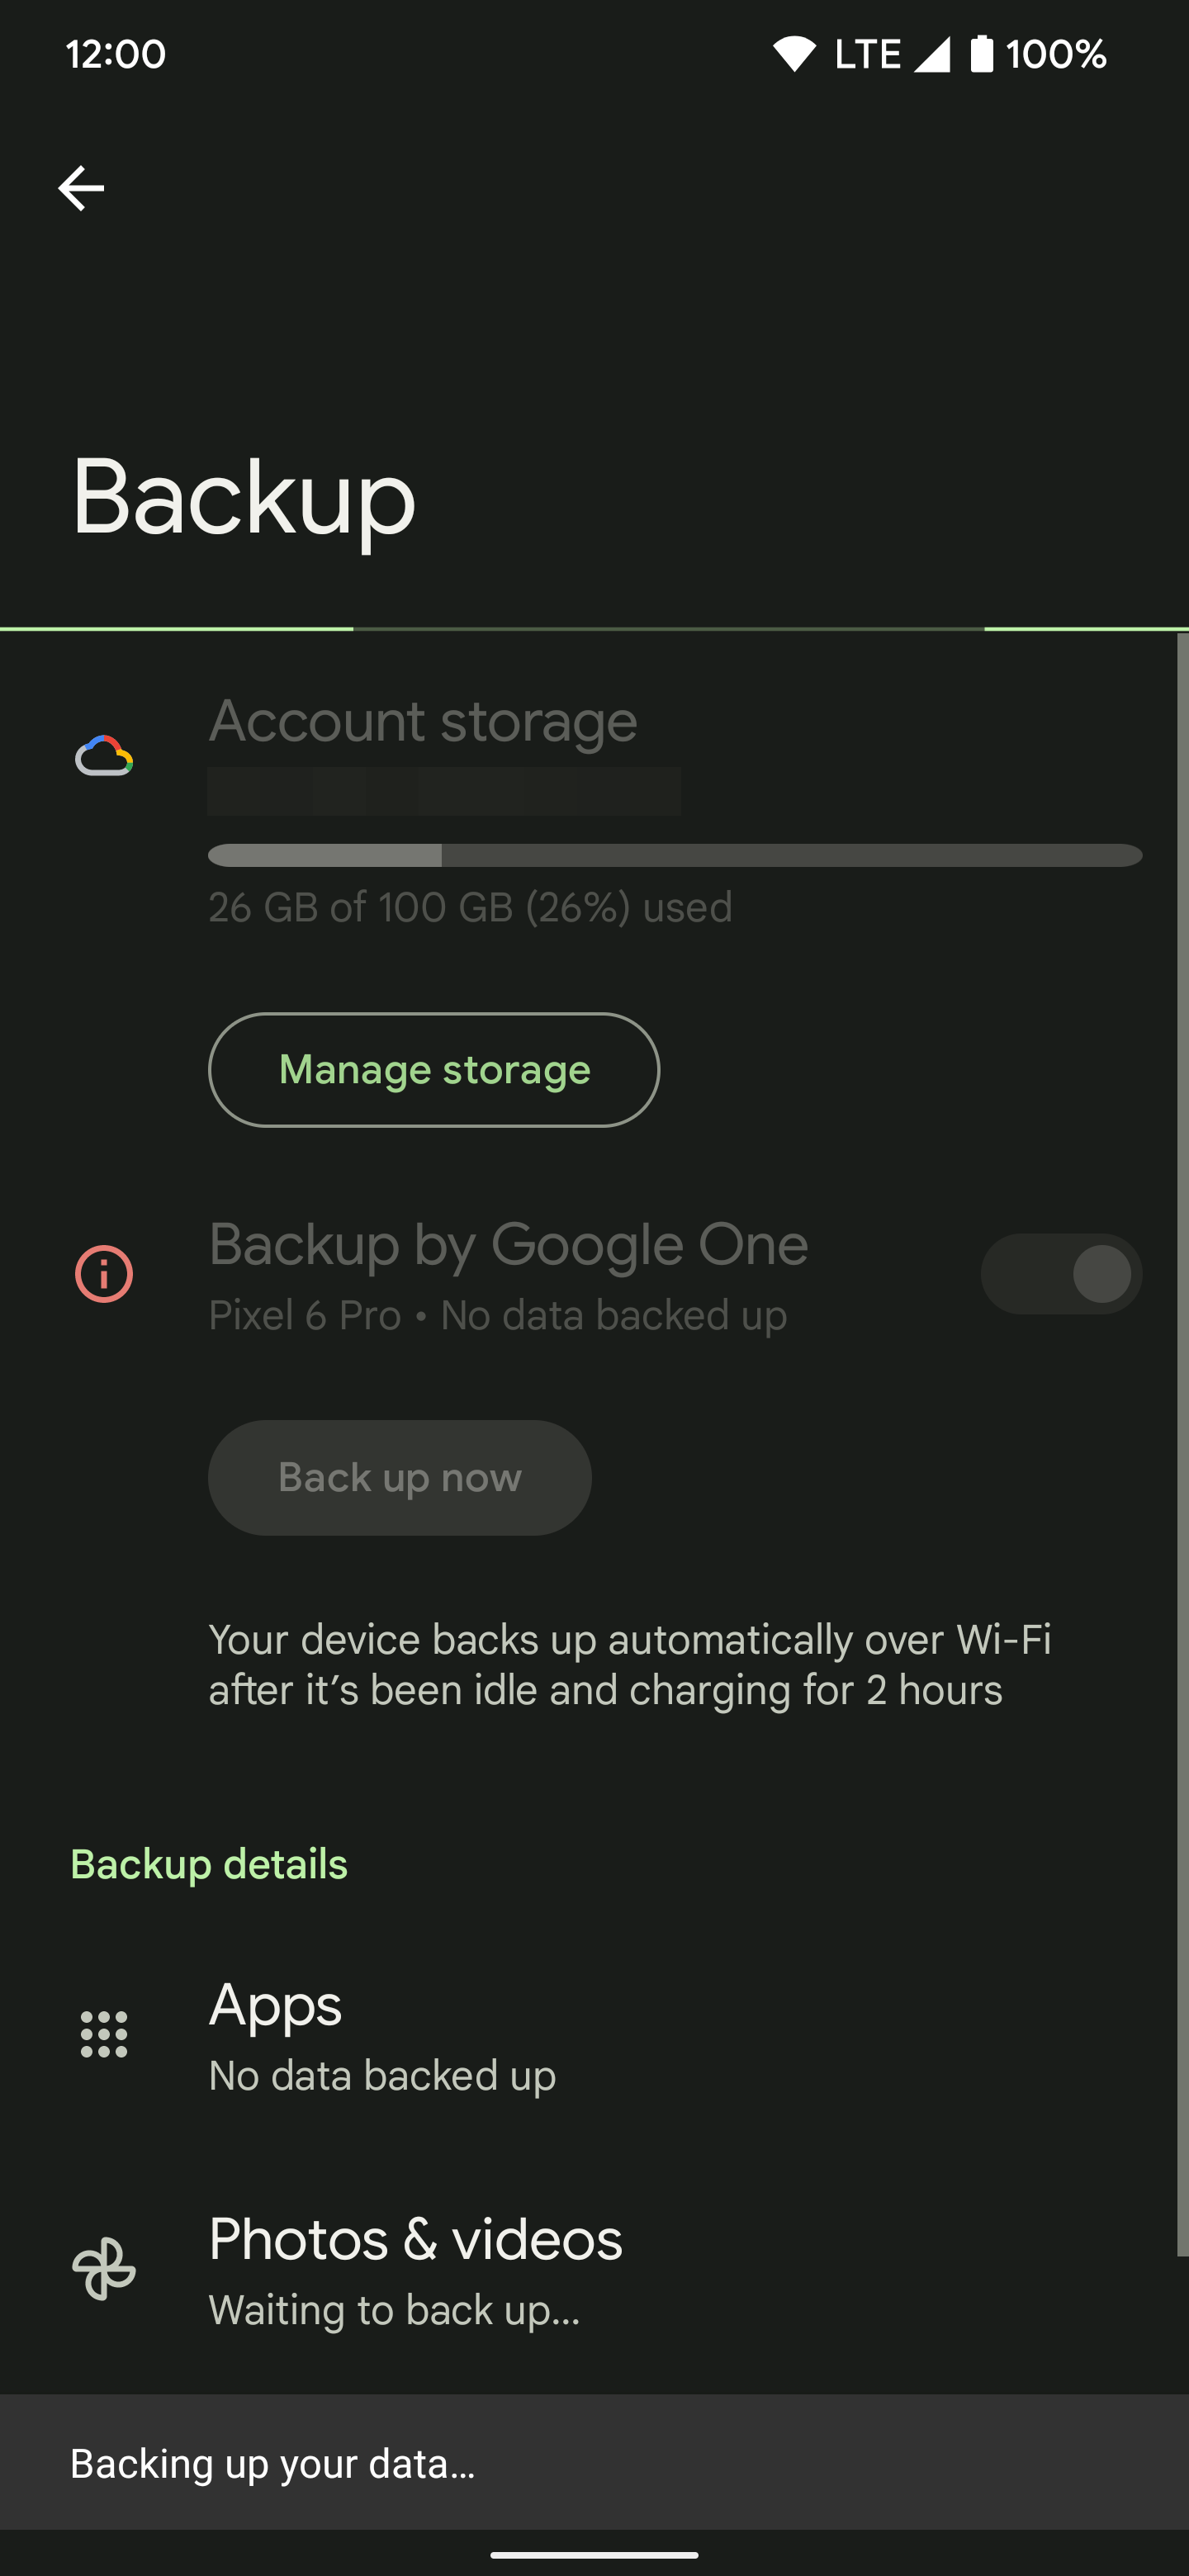 A new backup has been started in the Google One app